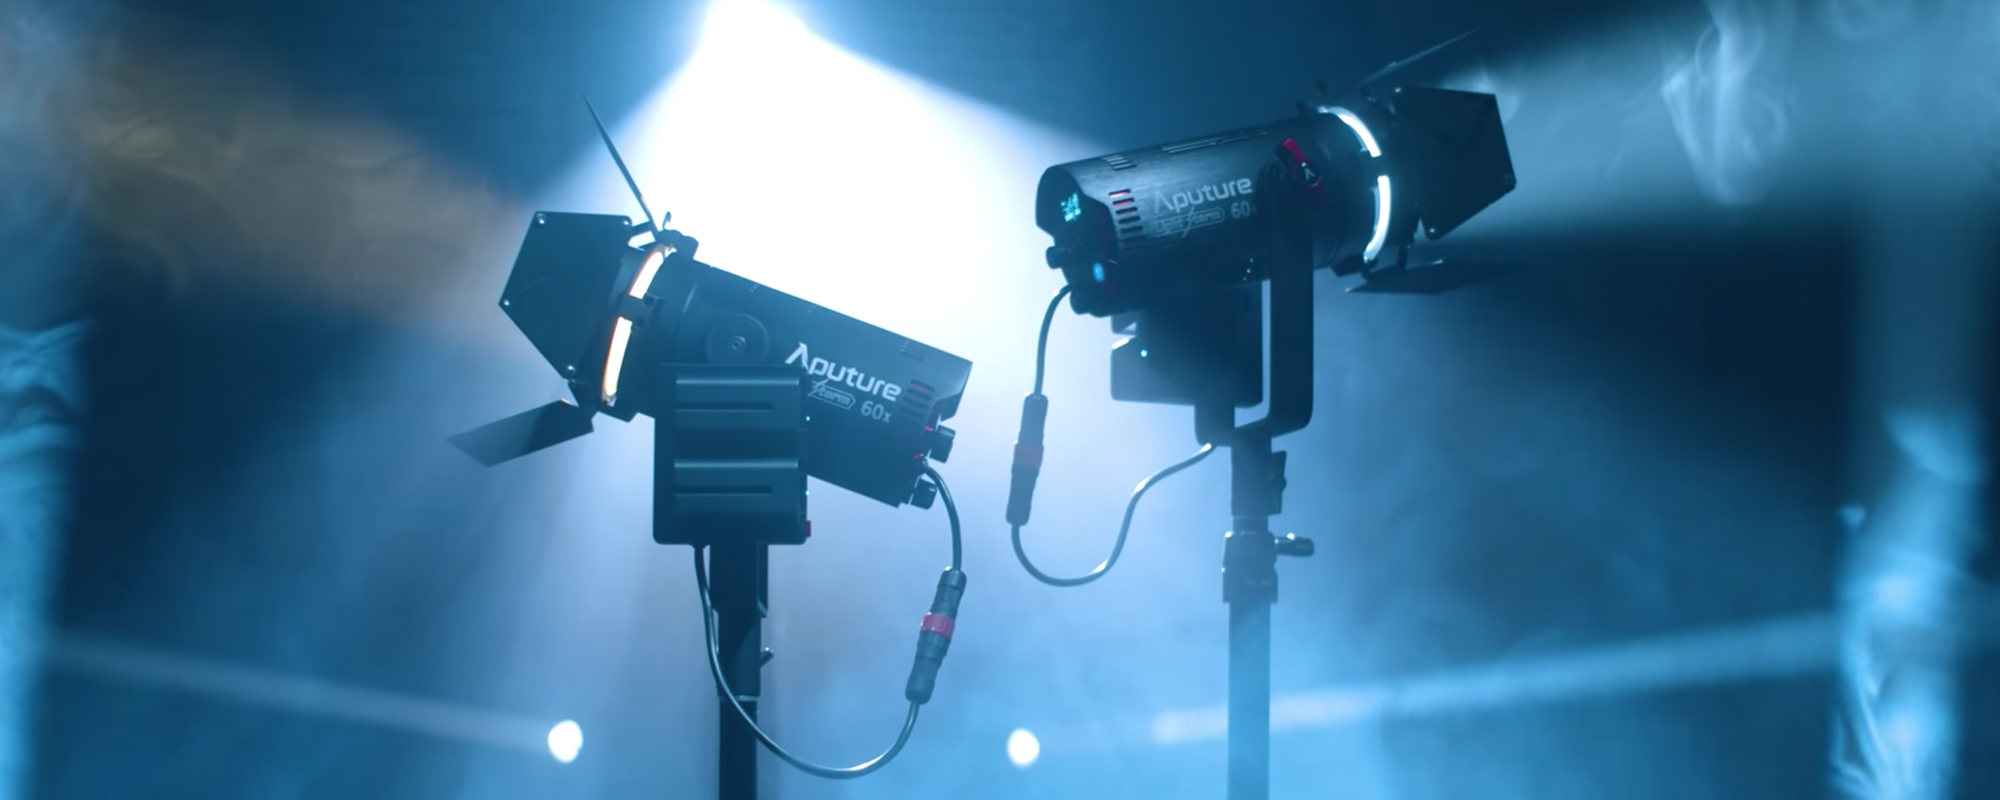 two Aputure Light Storm LS 60x LED lights shown from the side